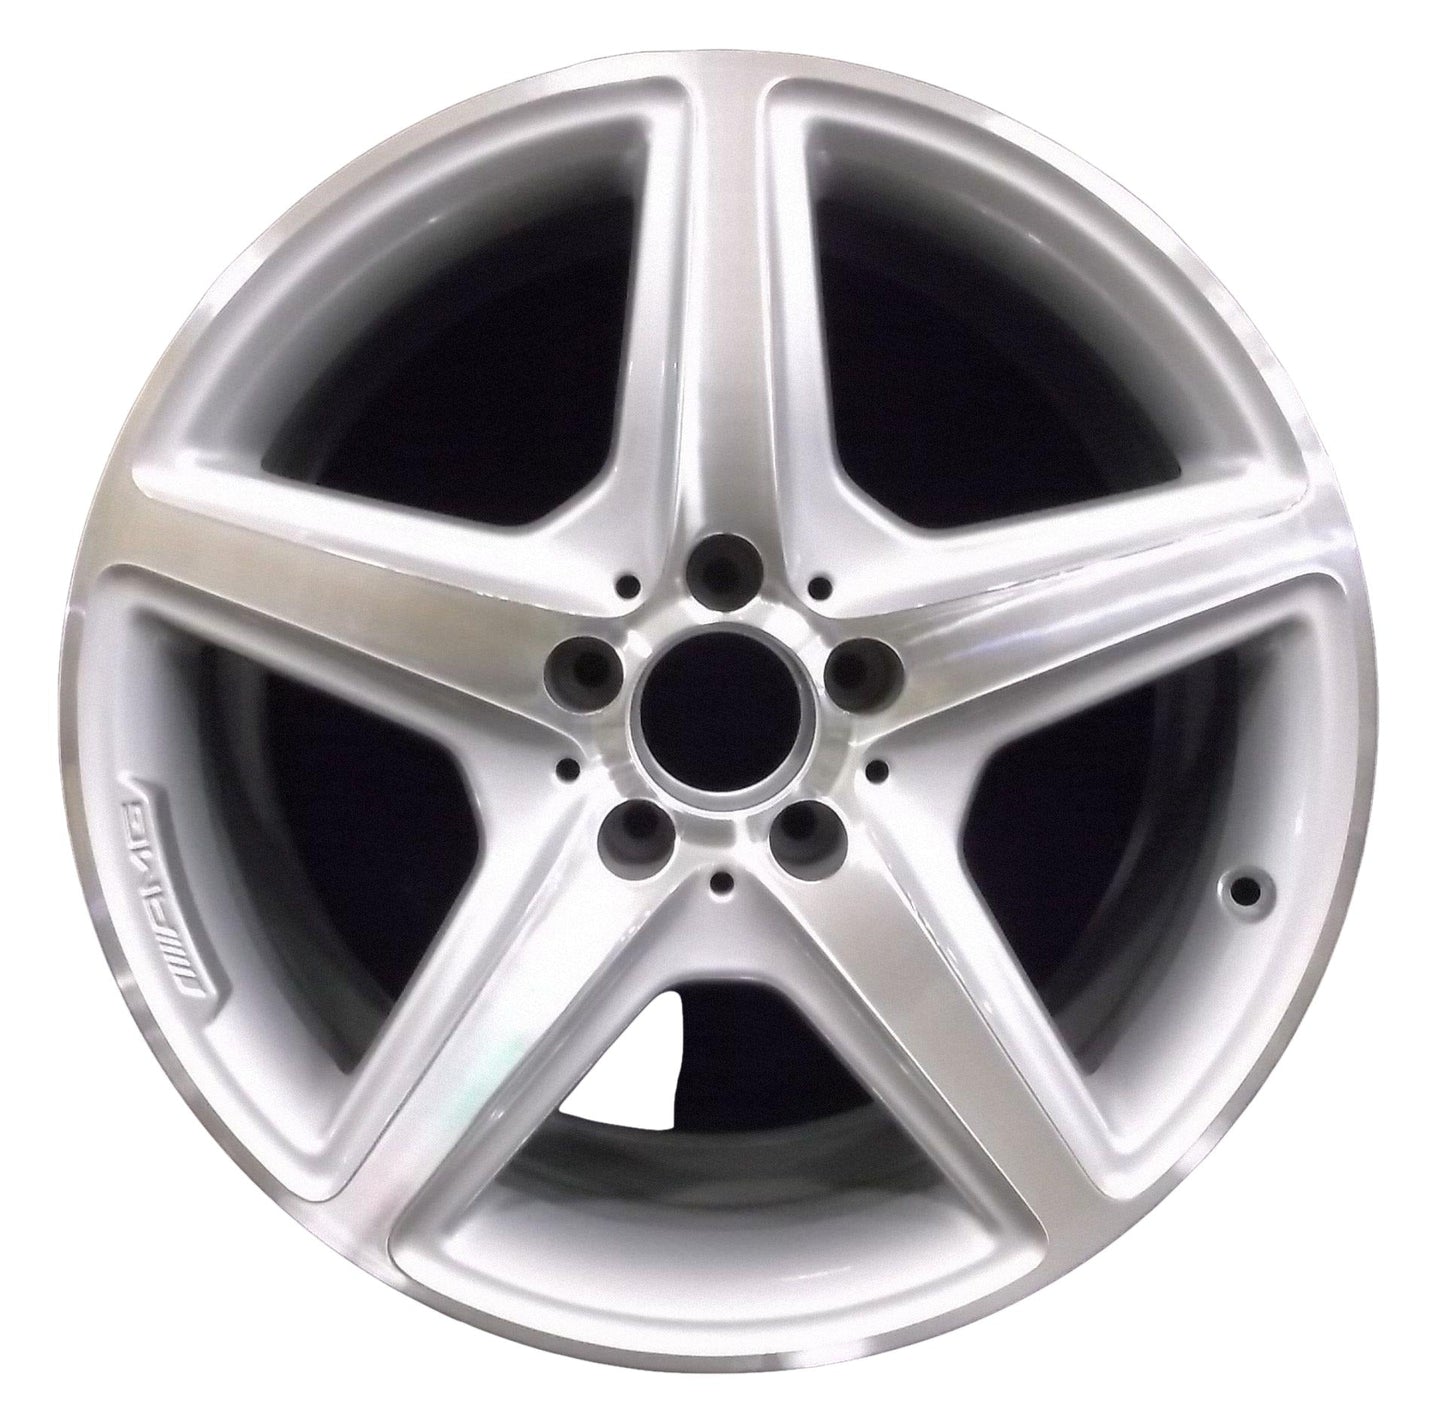 Mercedes CLS550  2012, 2013, 2014, 2015, 2016, 2017, 2018 Factory OEM Car Wheel Size 18x8.5 Alloy WAO.85230FT.PS06.MA